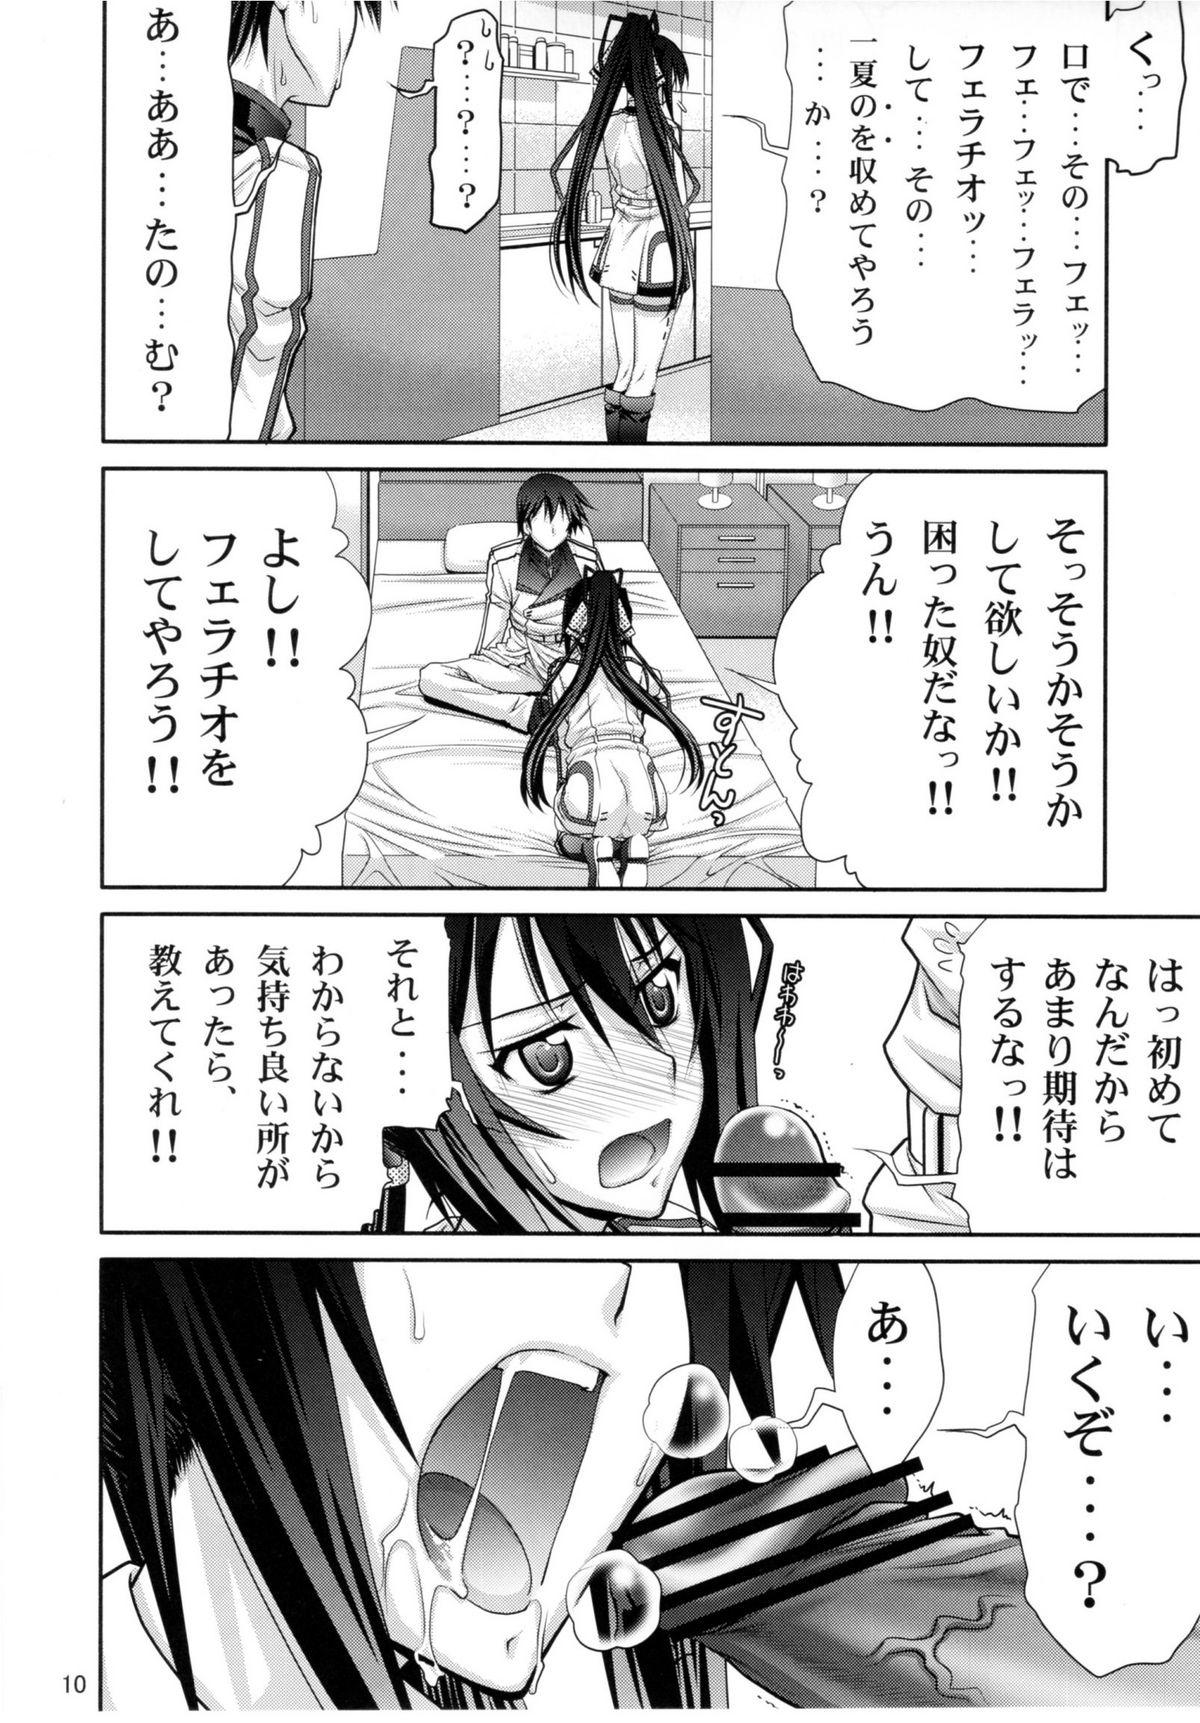 Hymen IS - Infinite stratos Stud - Page 10